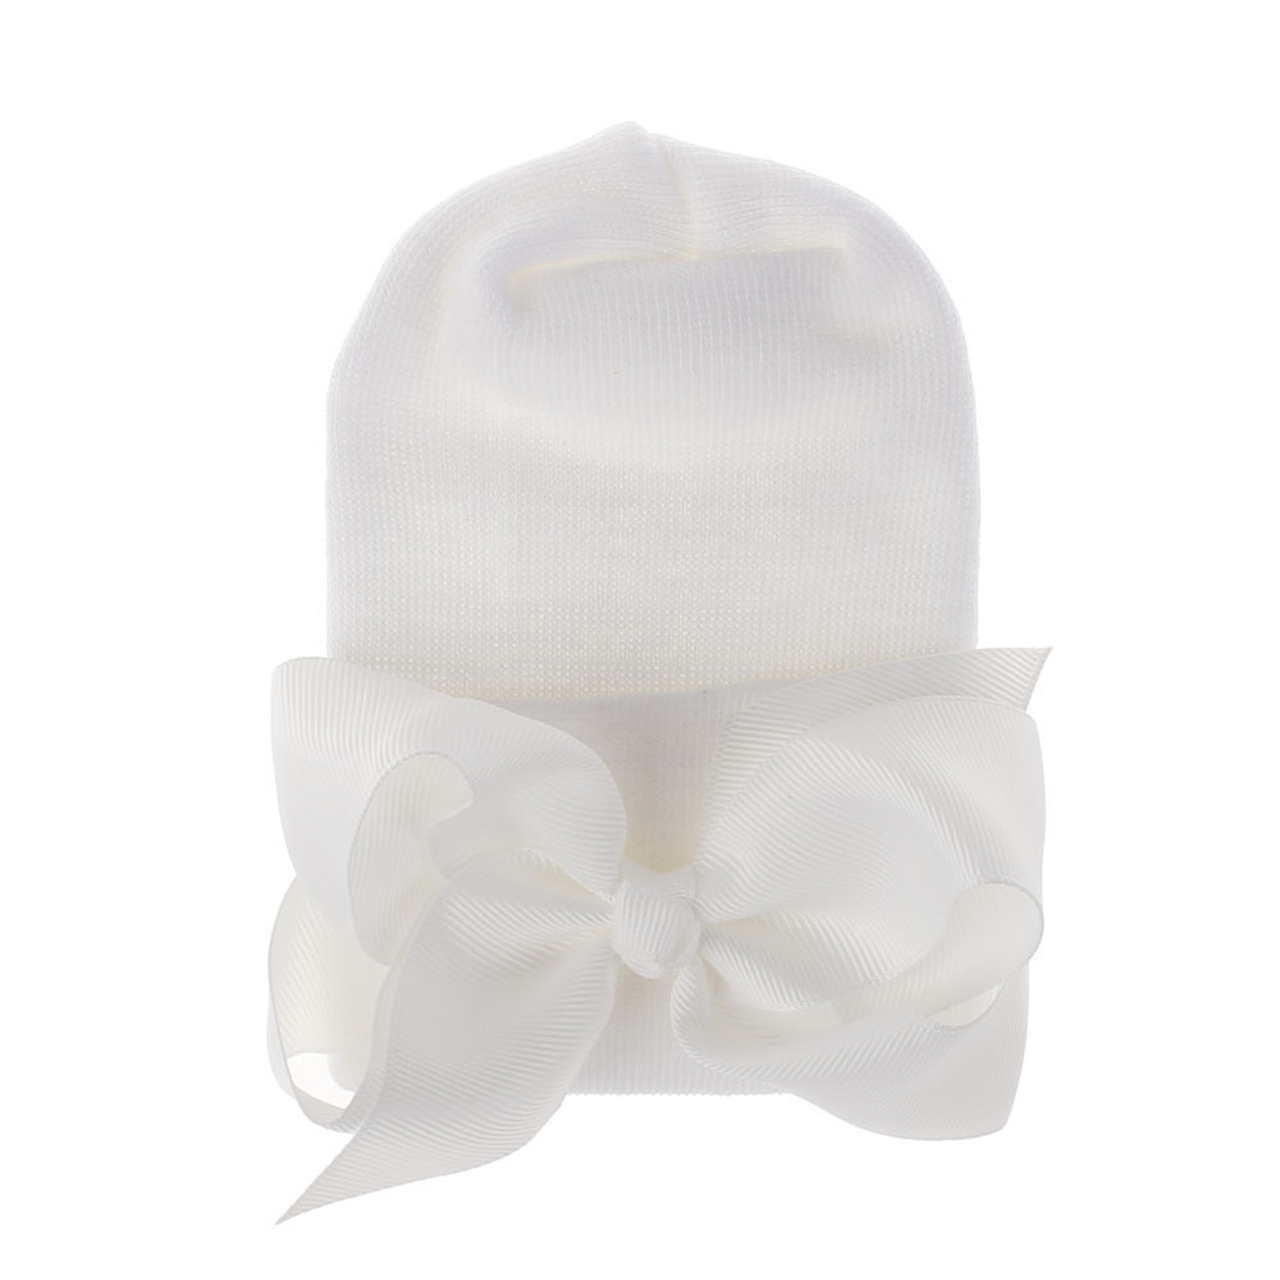 Baby Girl Bow Hat